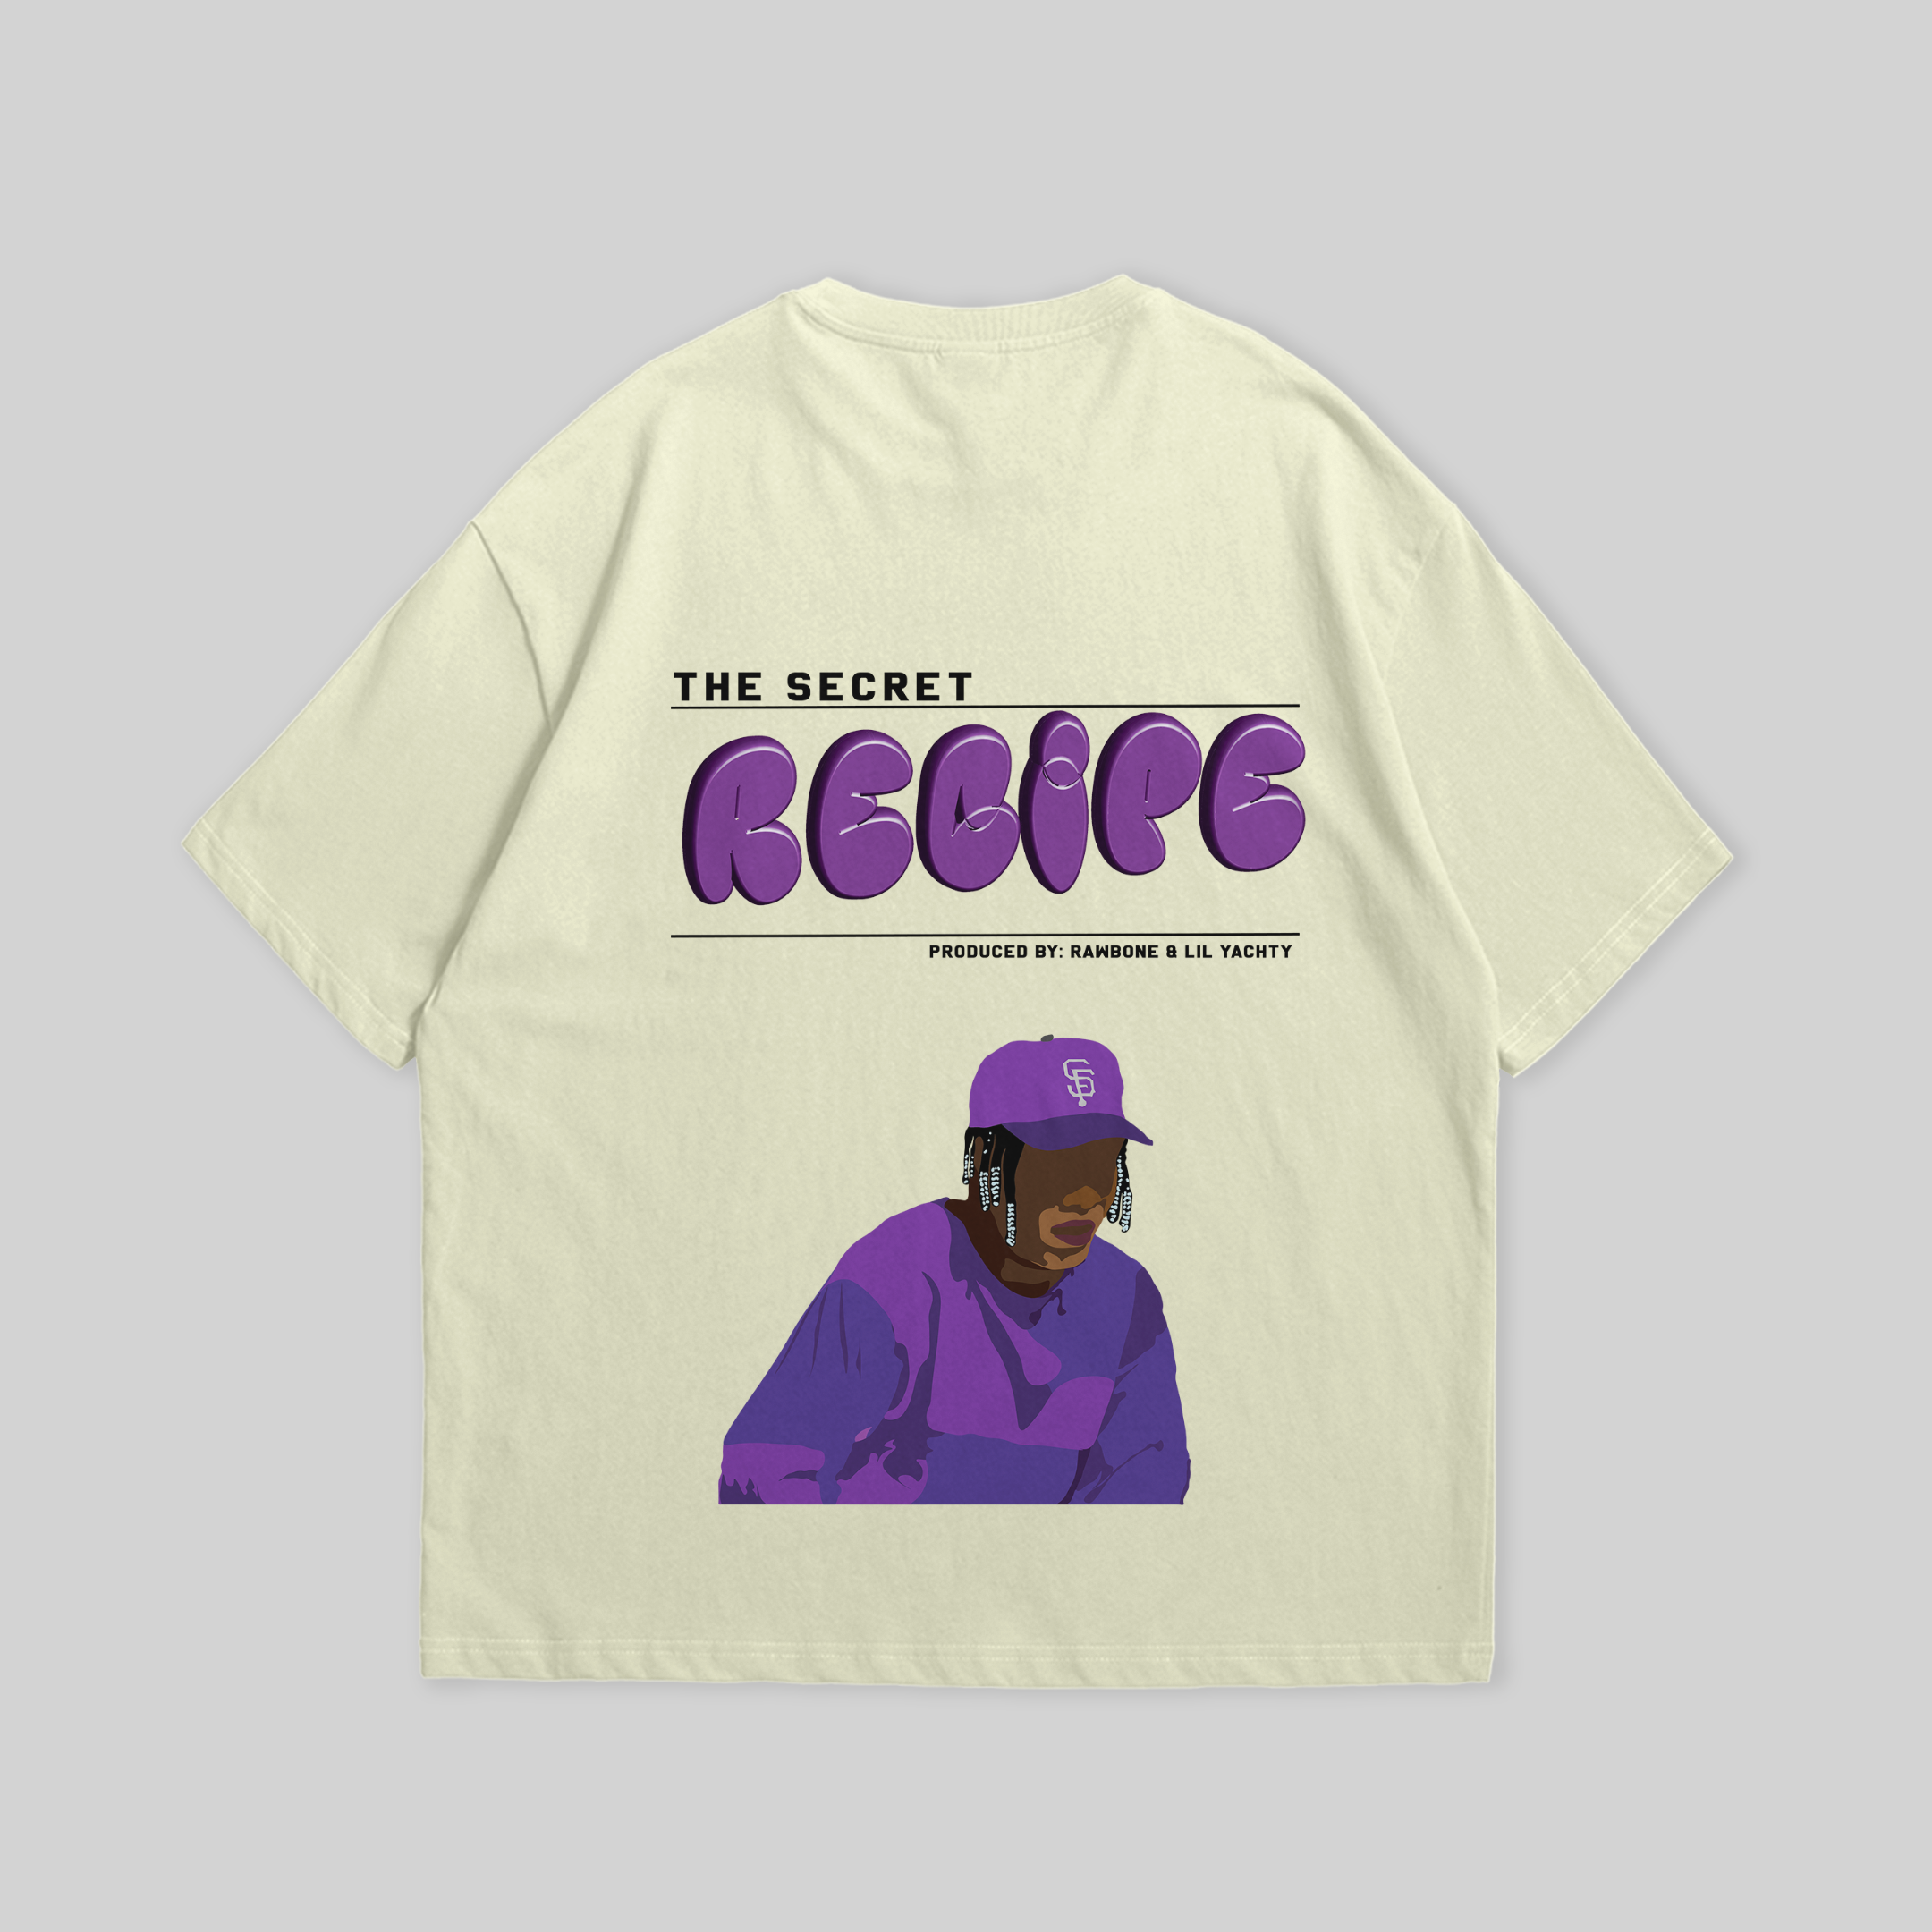 A stylish unisex cream-colored t-shirt featuring a vibrant purple graphic of ‘The Secret Recipe’ and an artistic illustration, perfect for casual wear.